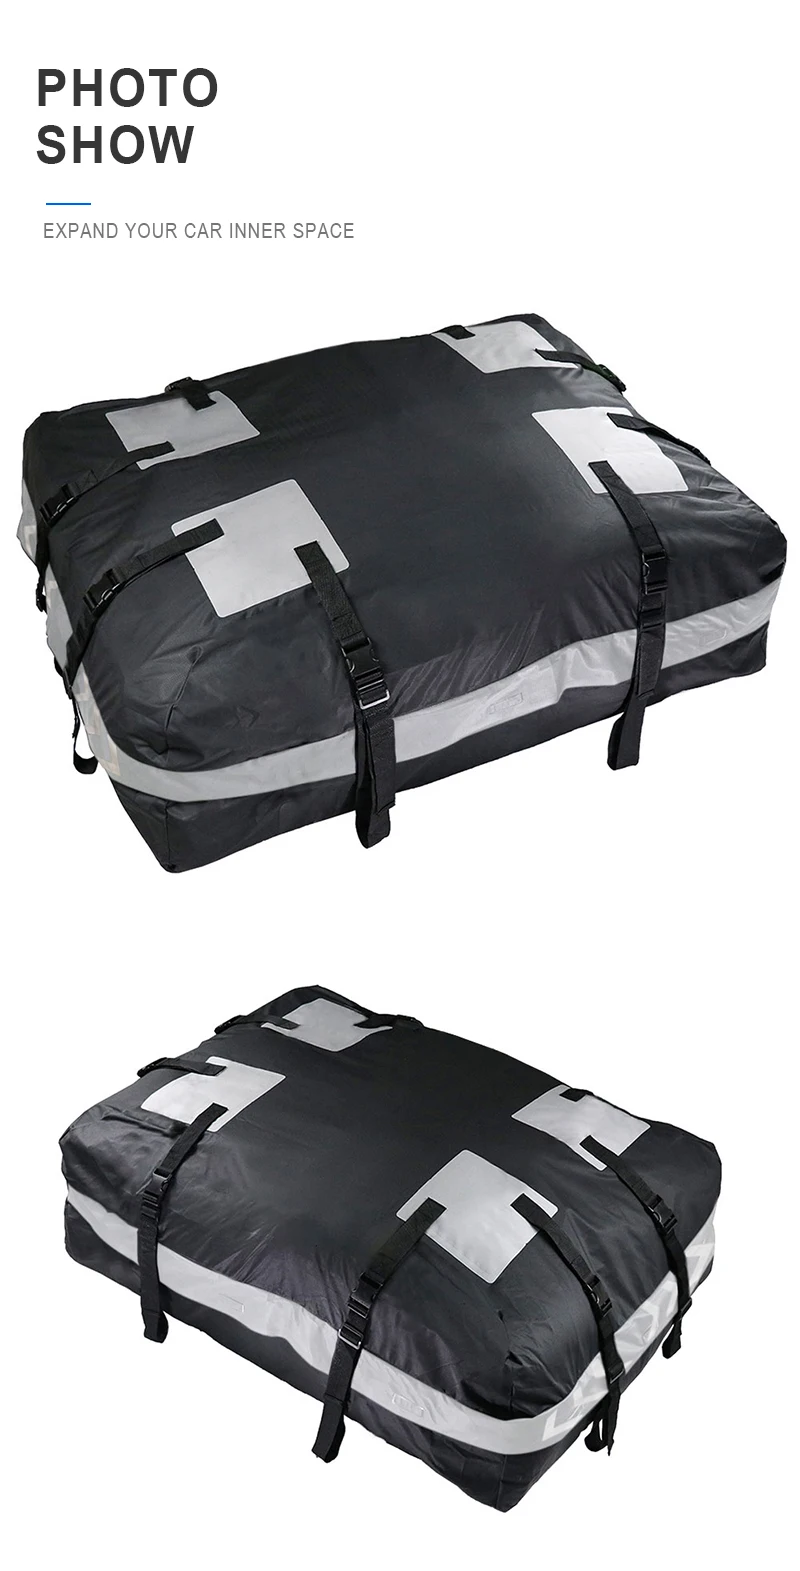 Universal Car Cargo Outdoor Travel Hiking Camping Waterproof Car Cargo Luggage Roof Top Carrier Bag